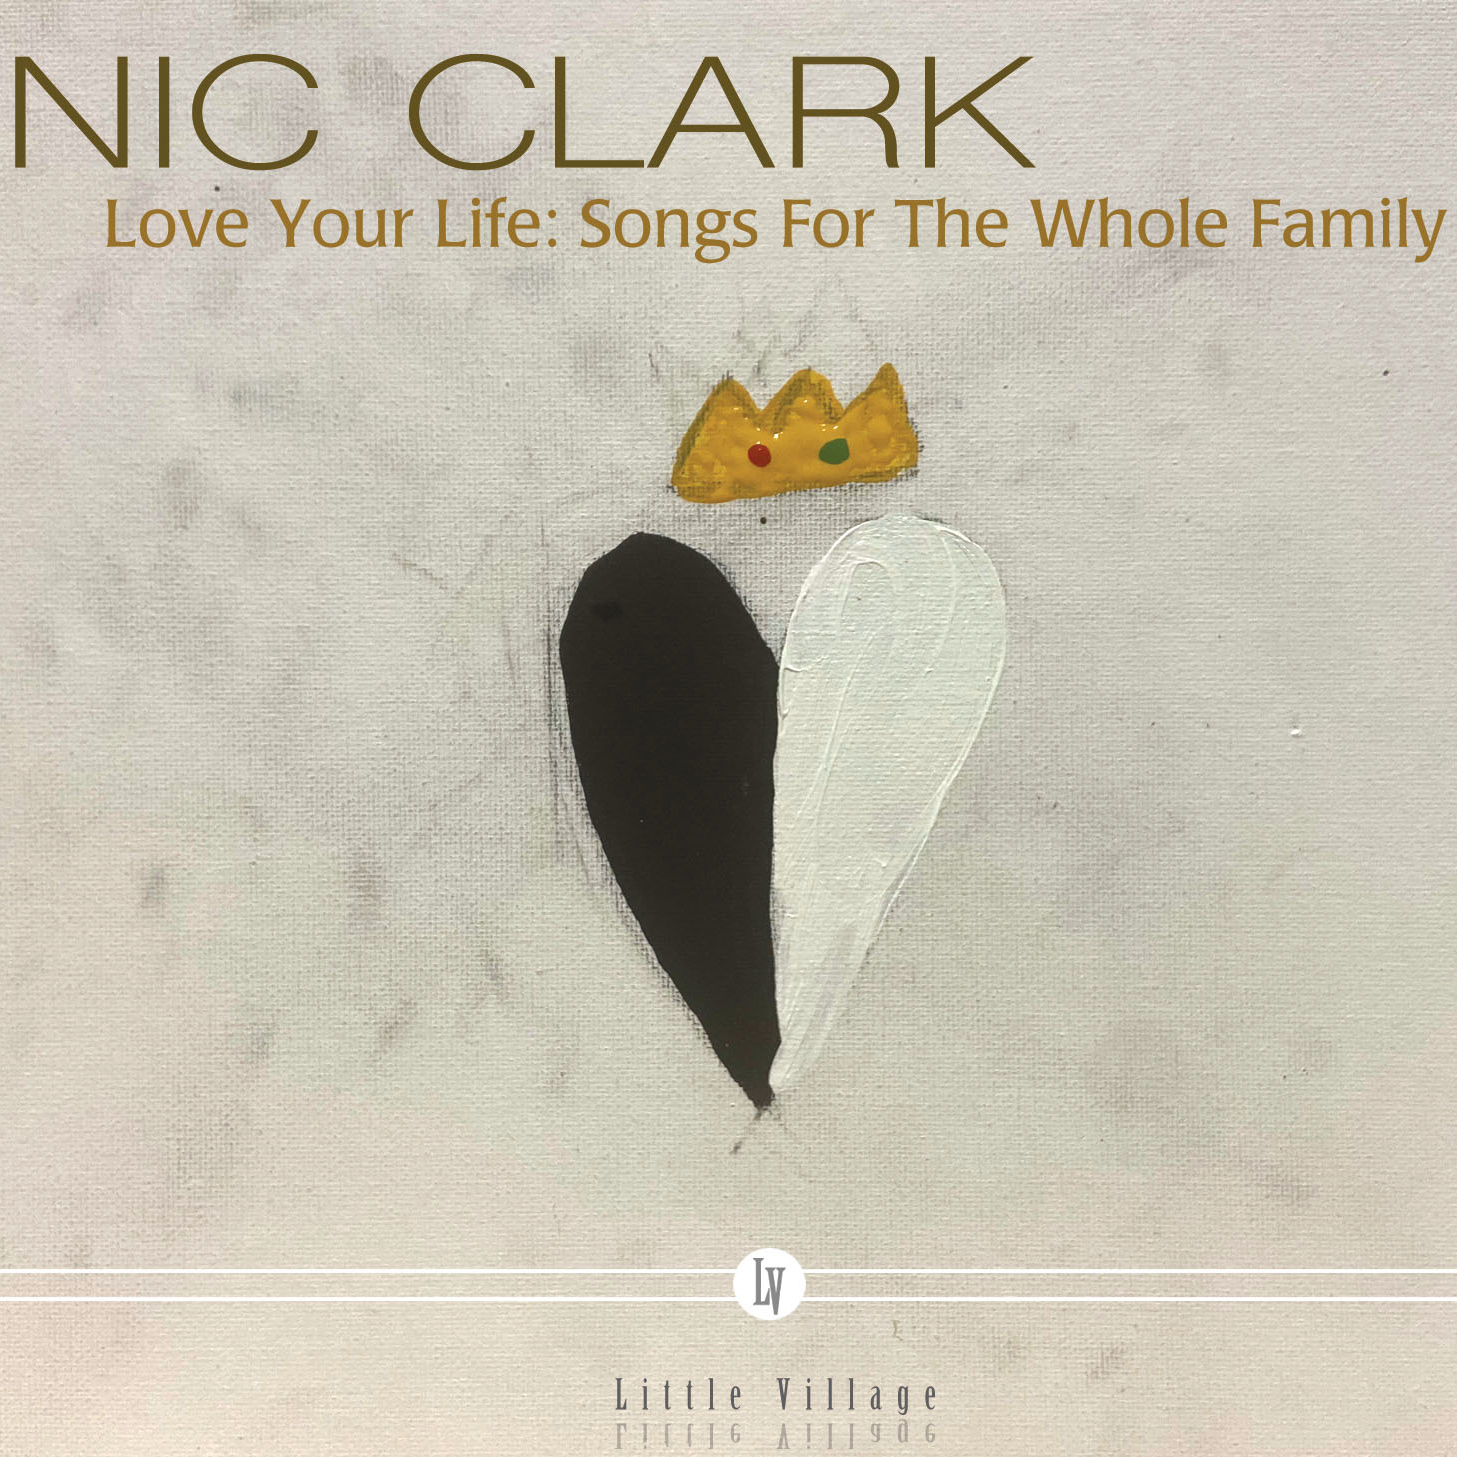 Nic Clark’s Love Your Life / Songs for the Whole Family